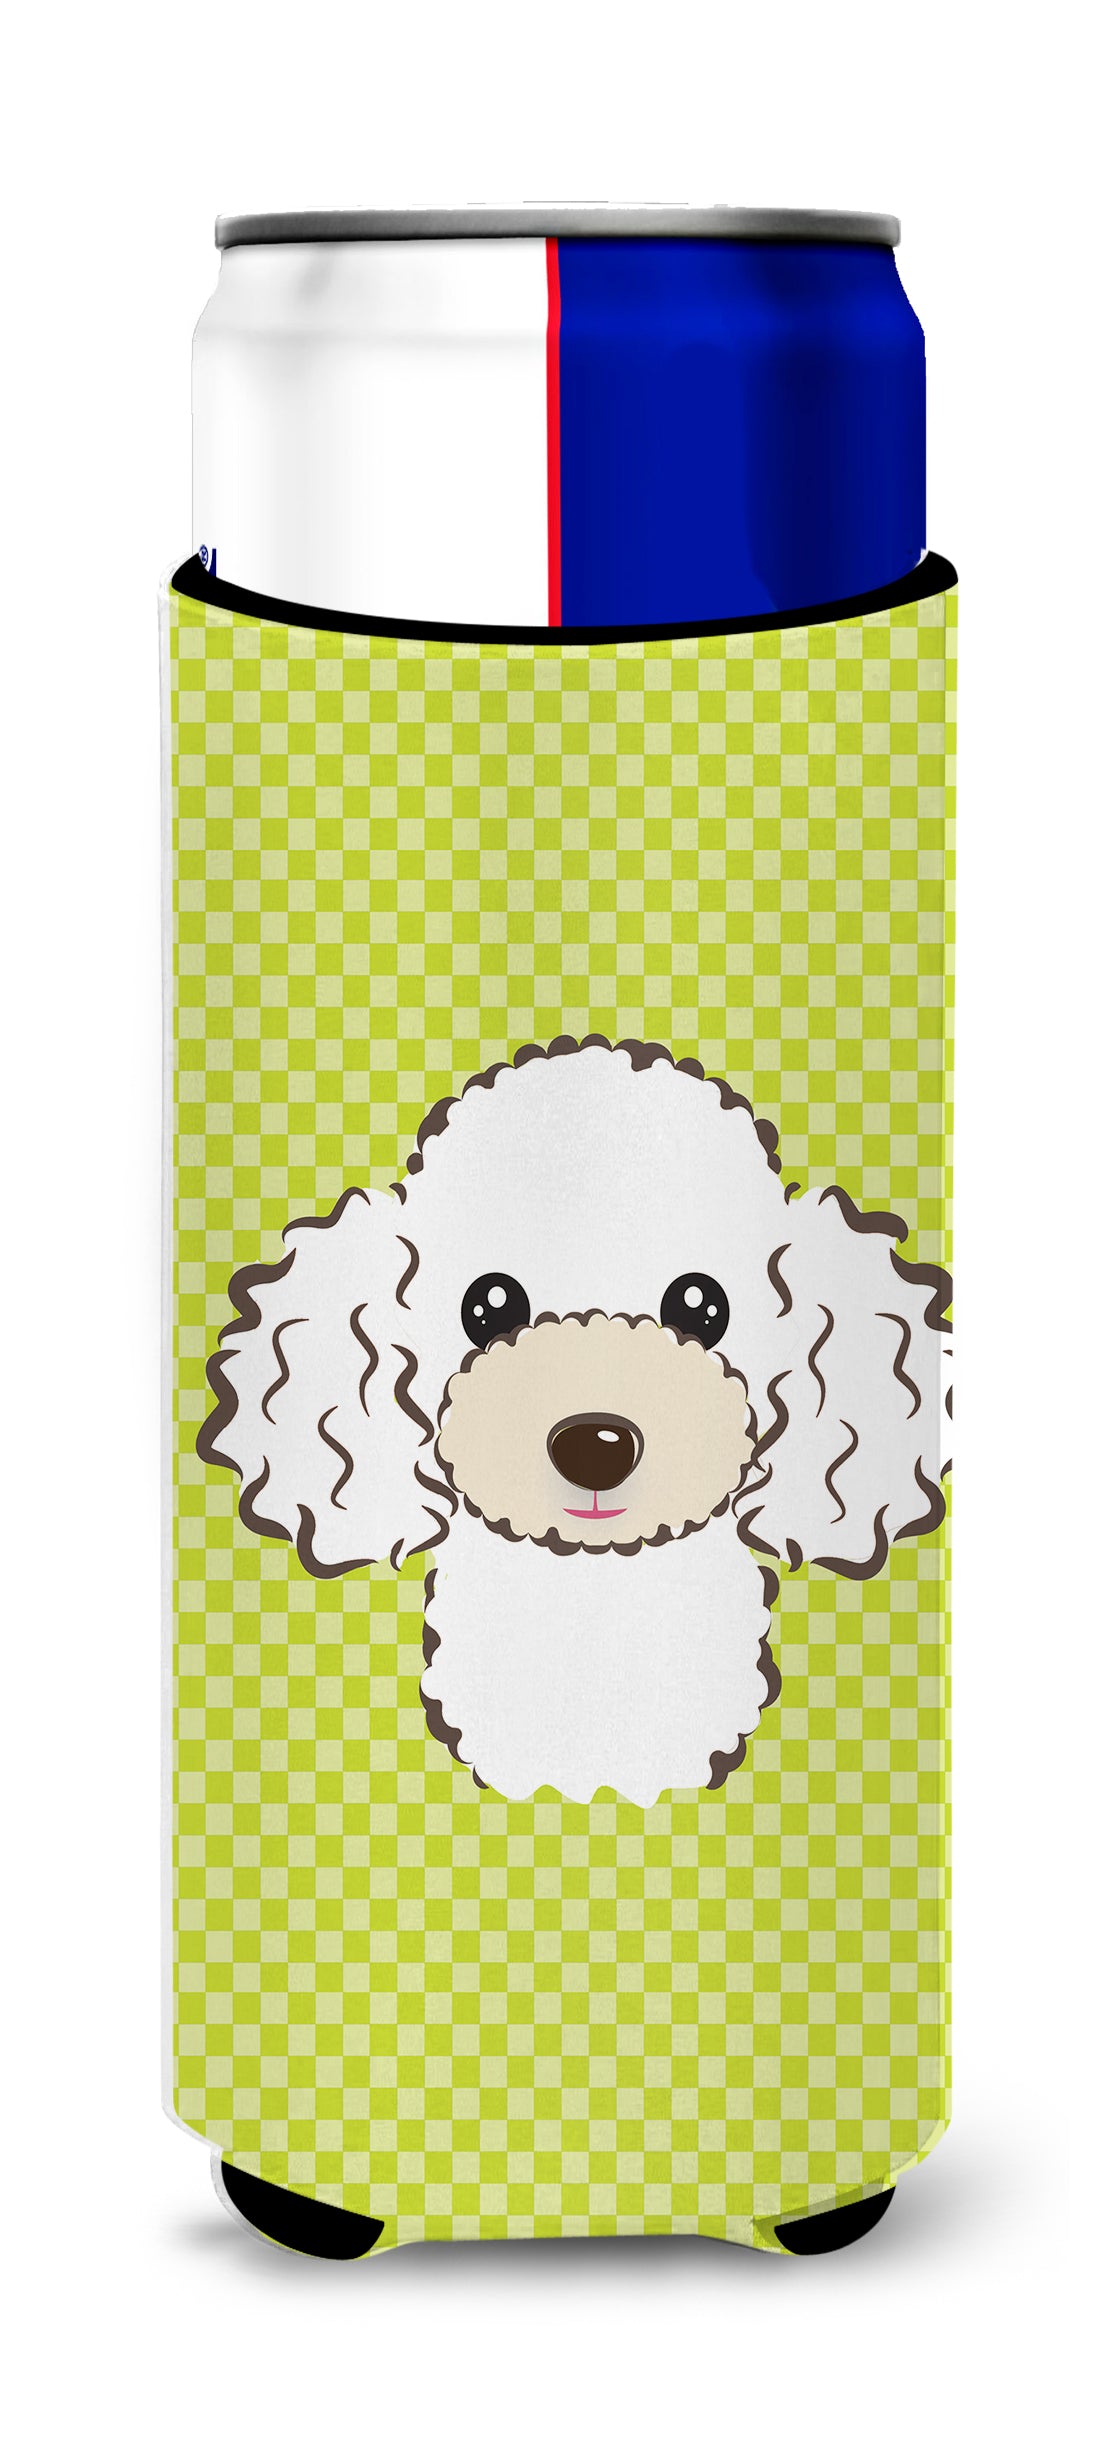 Checkerboard Lime Green White Poodle Ultra Beverage Insulators for slim cans.